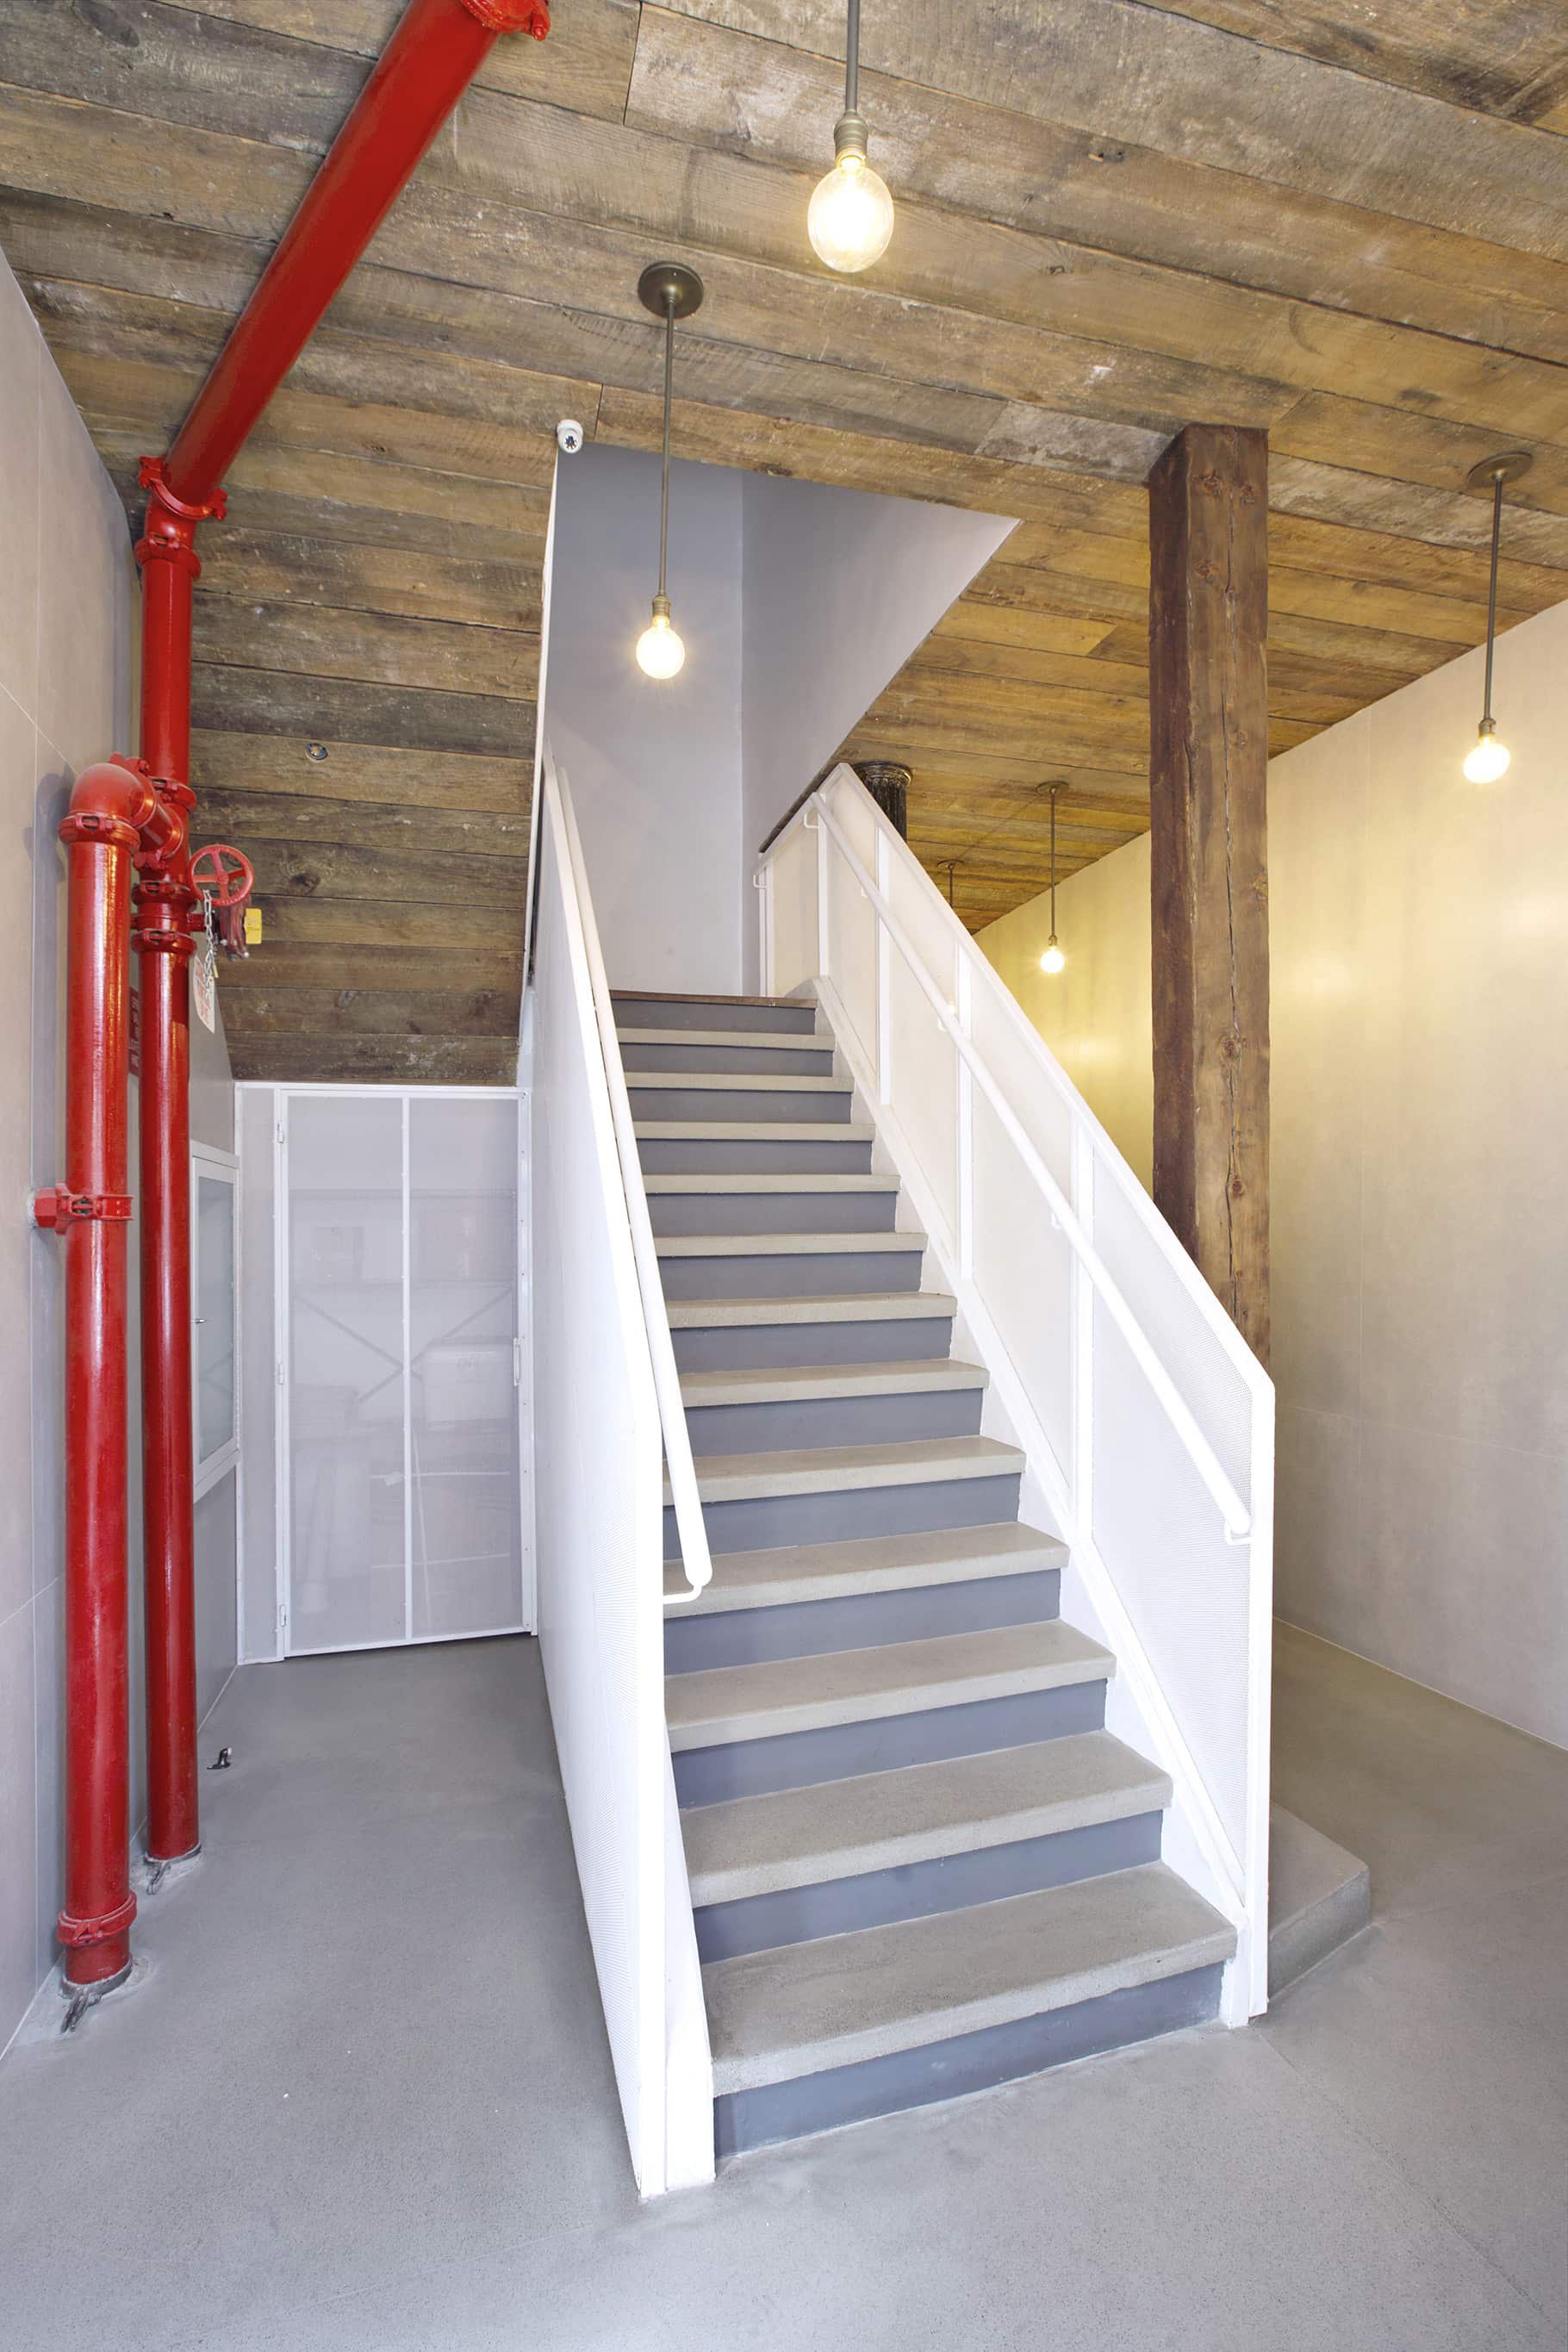 Soho NYC Residential Loft Lobby Architect Architecture Renovation Renovate Timber Column Reclaimed Industrial Exposed